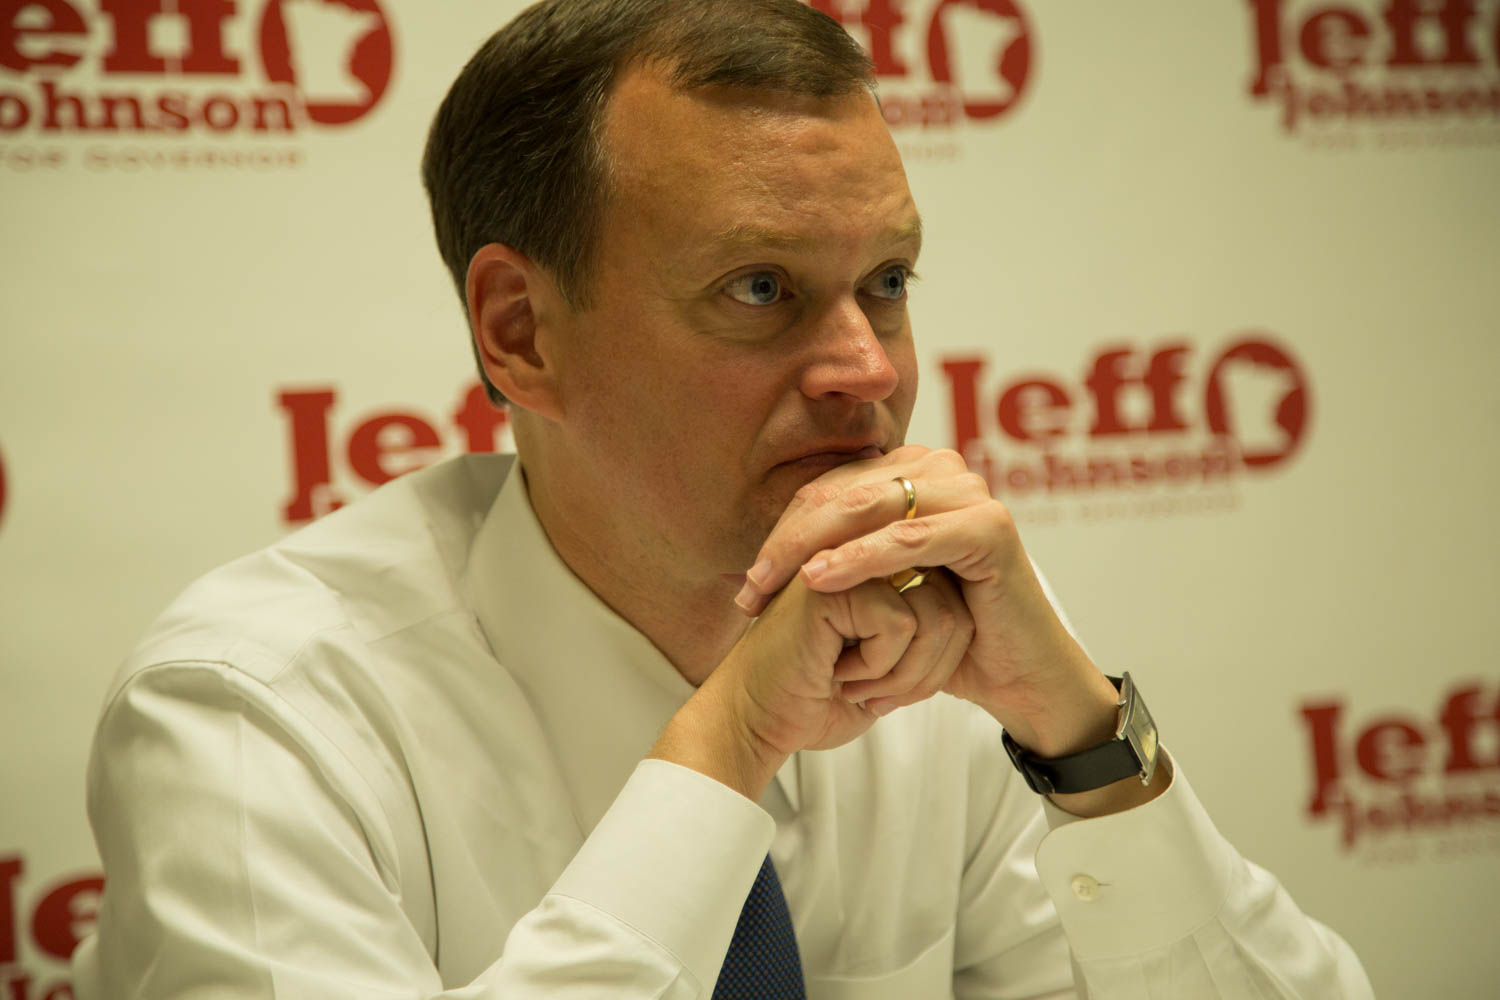 Jeff Johnson Candidate for Governor of Minnesota